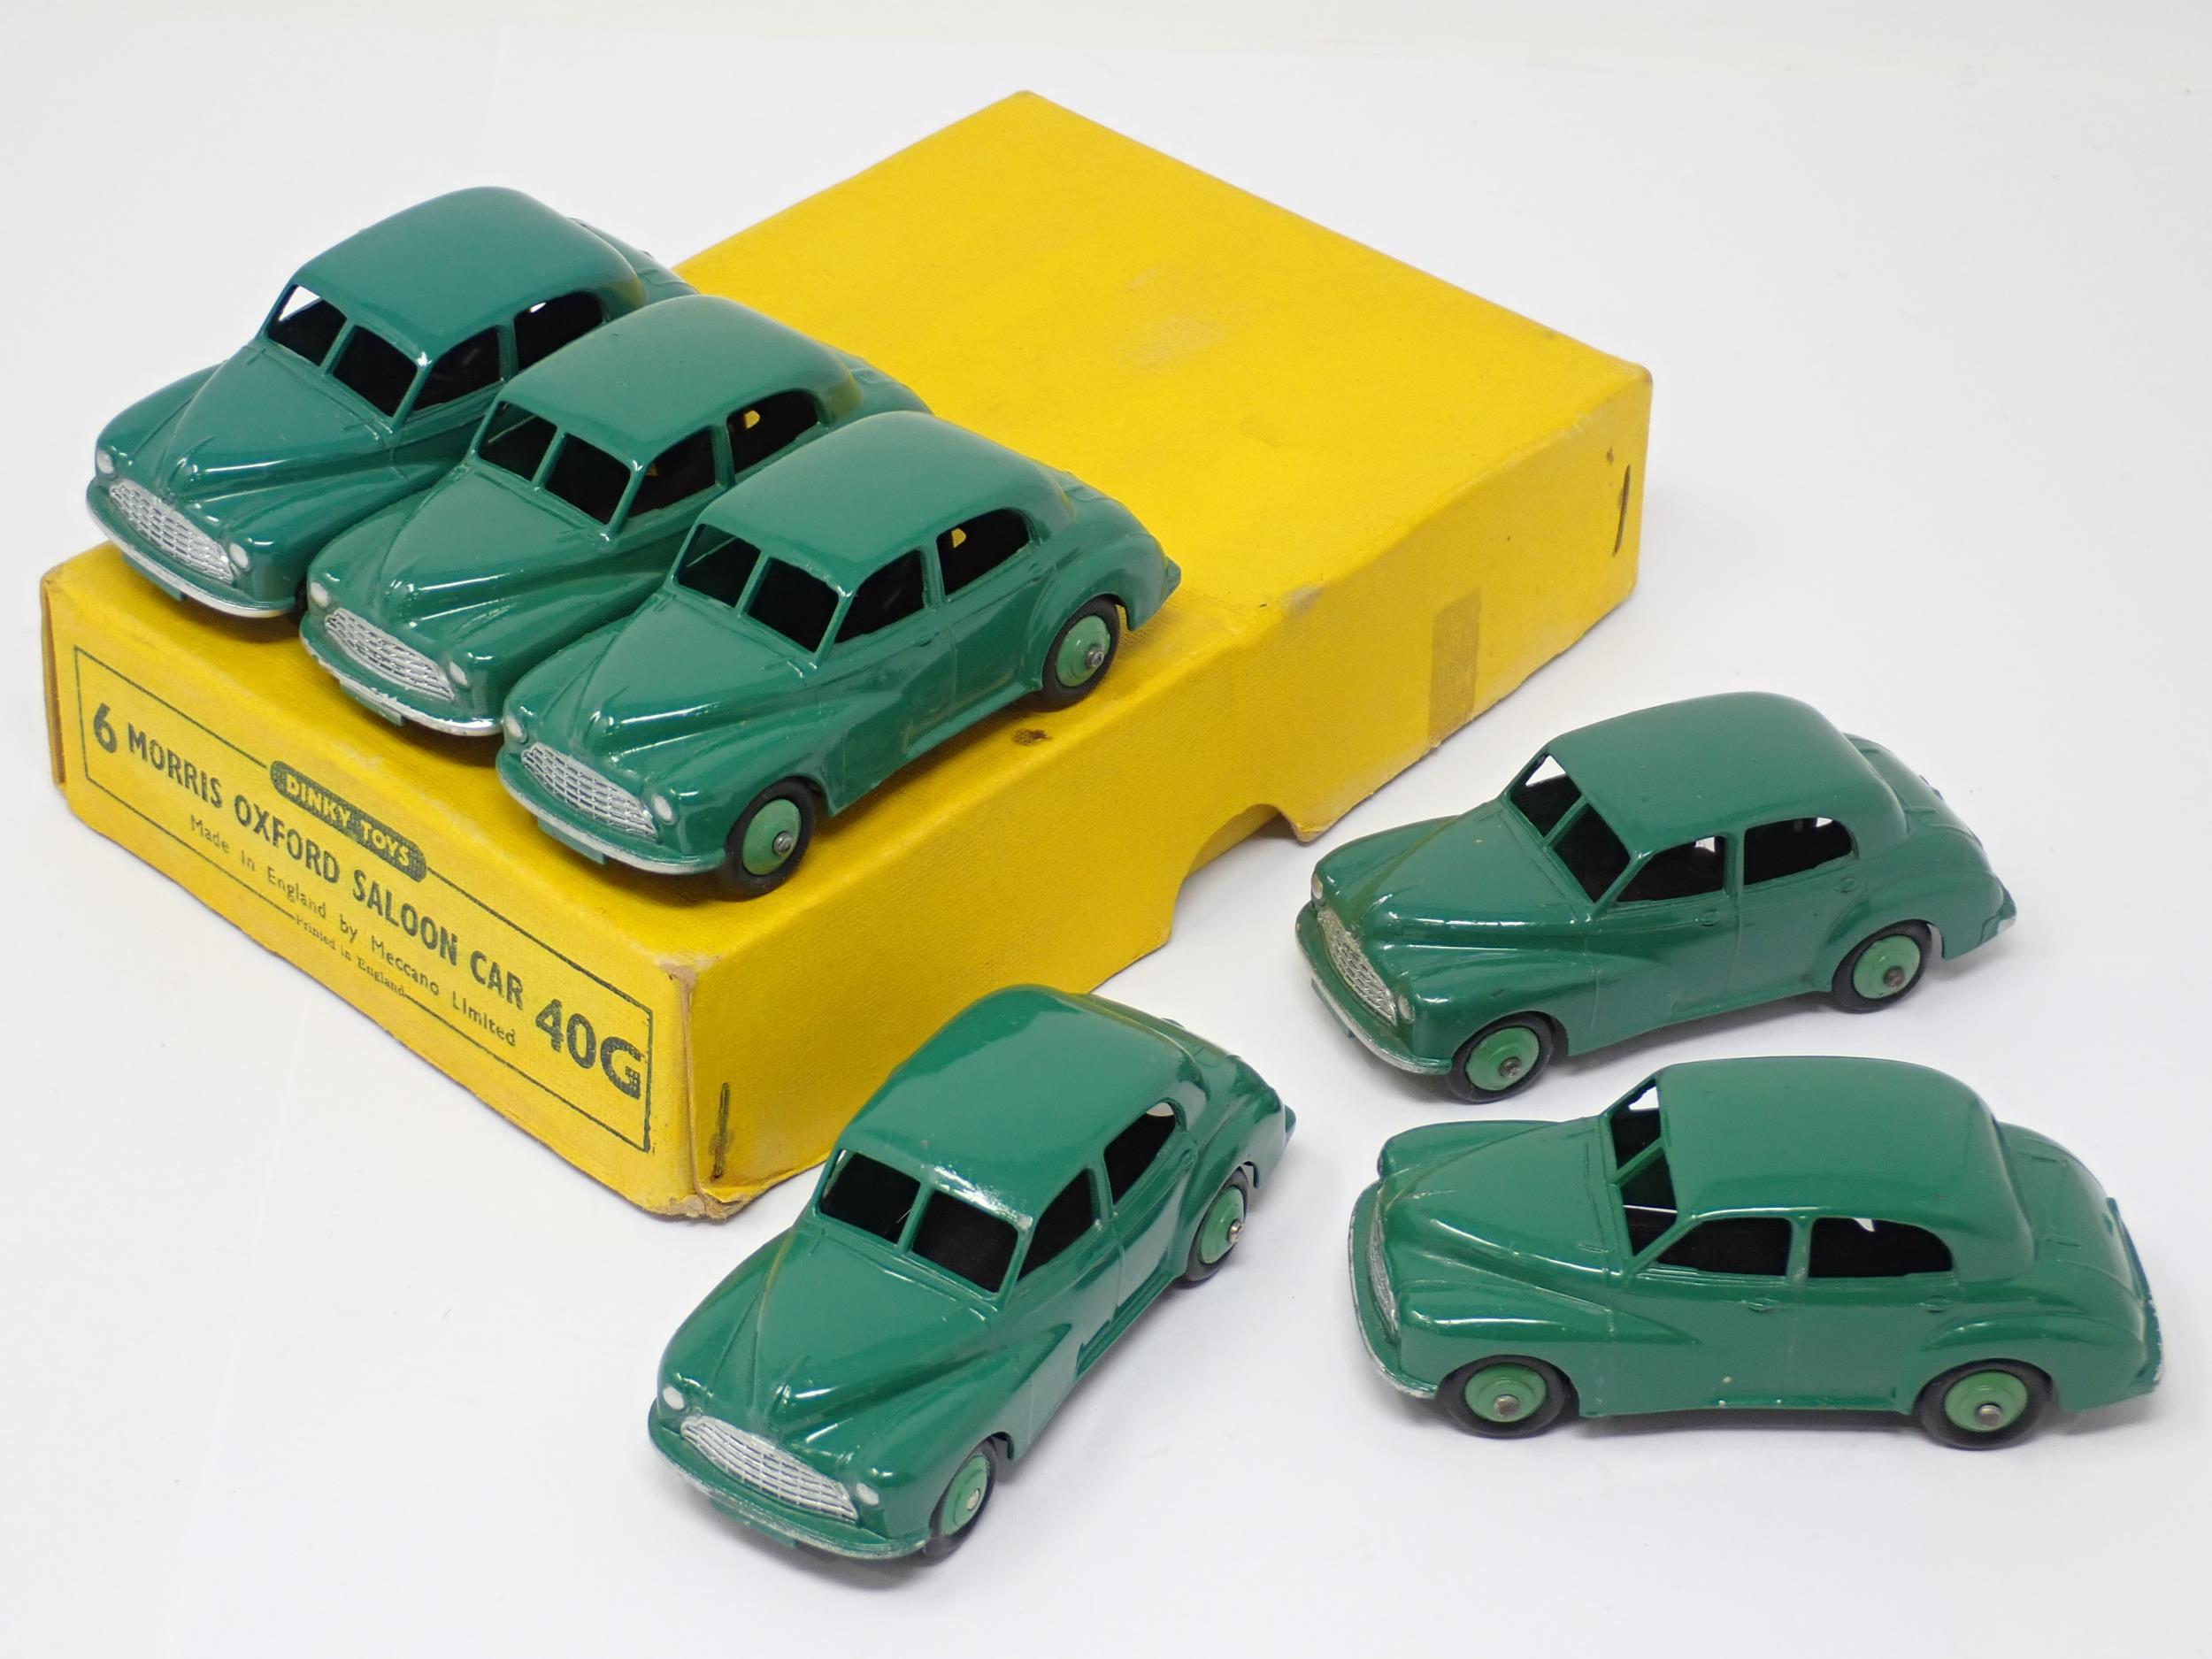 A Dinky Toys No.40G full Trade Box containing six green Morris Oxford Saloon Cars - Image 2 of 3